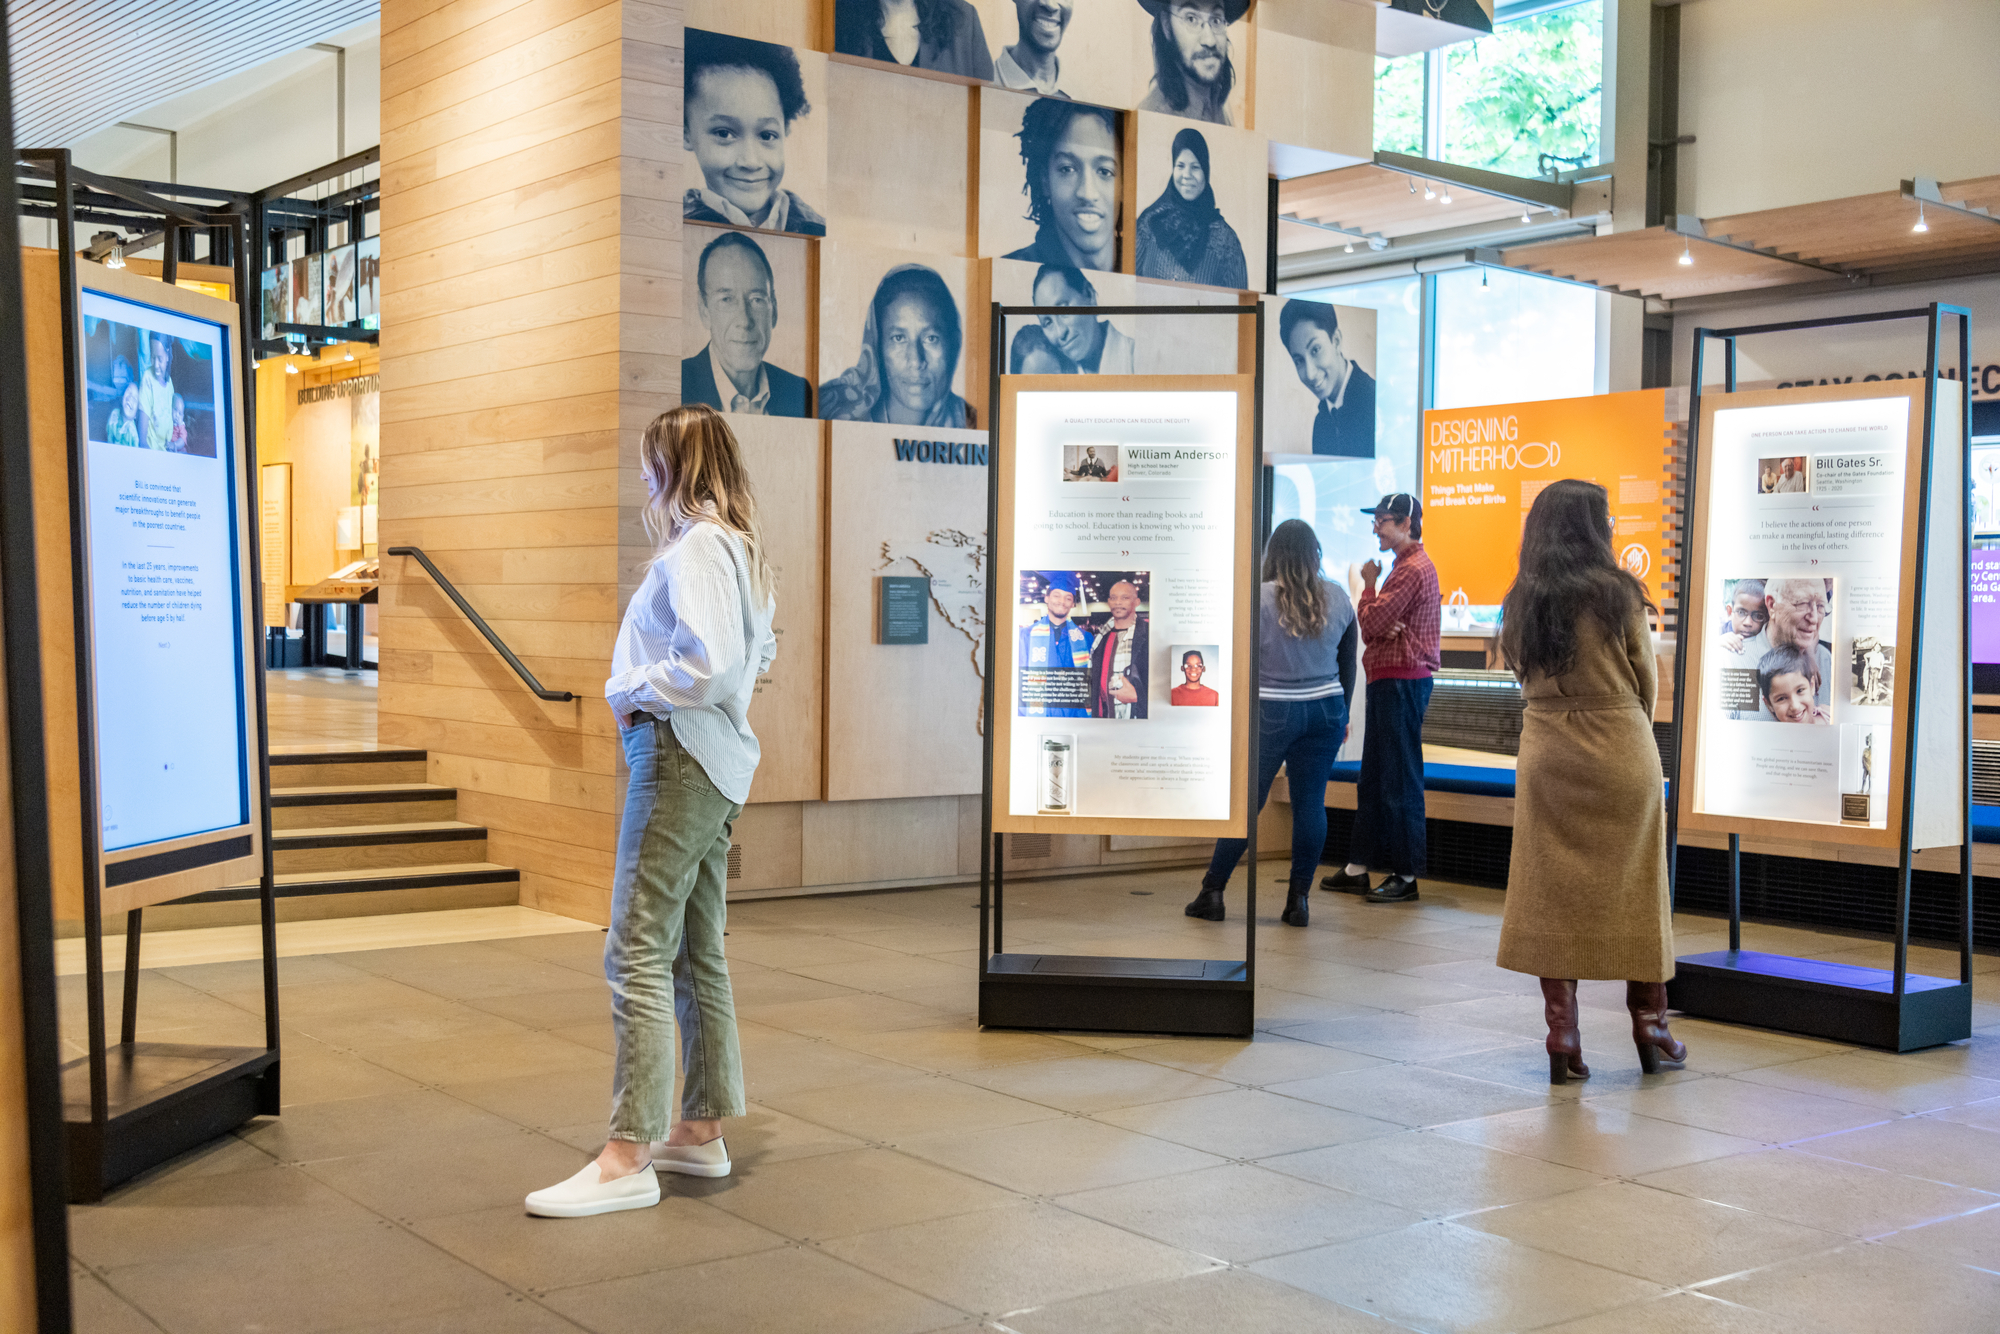 Visitors interact with the stories in the Welcome Gallery